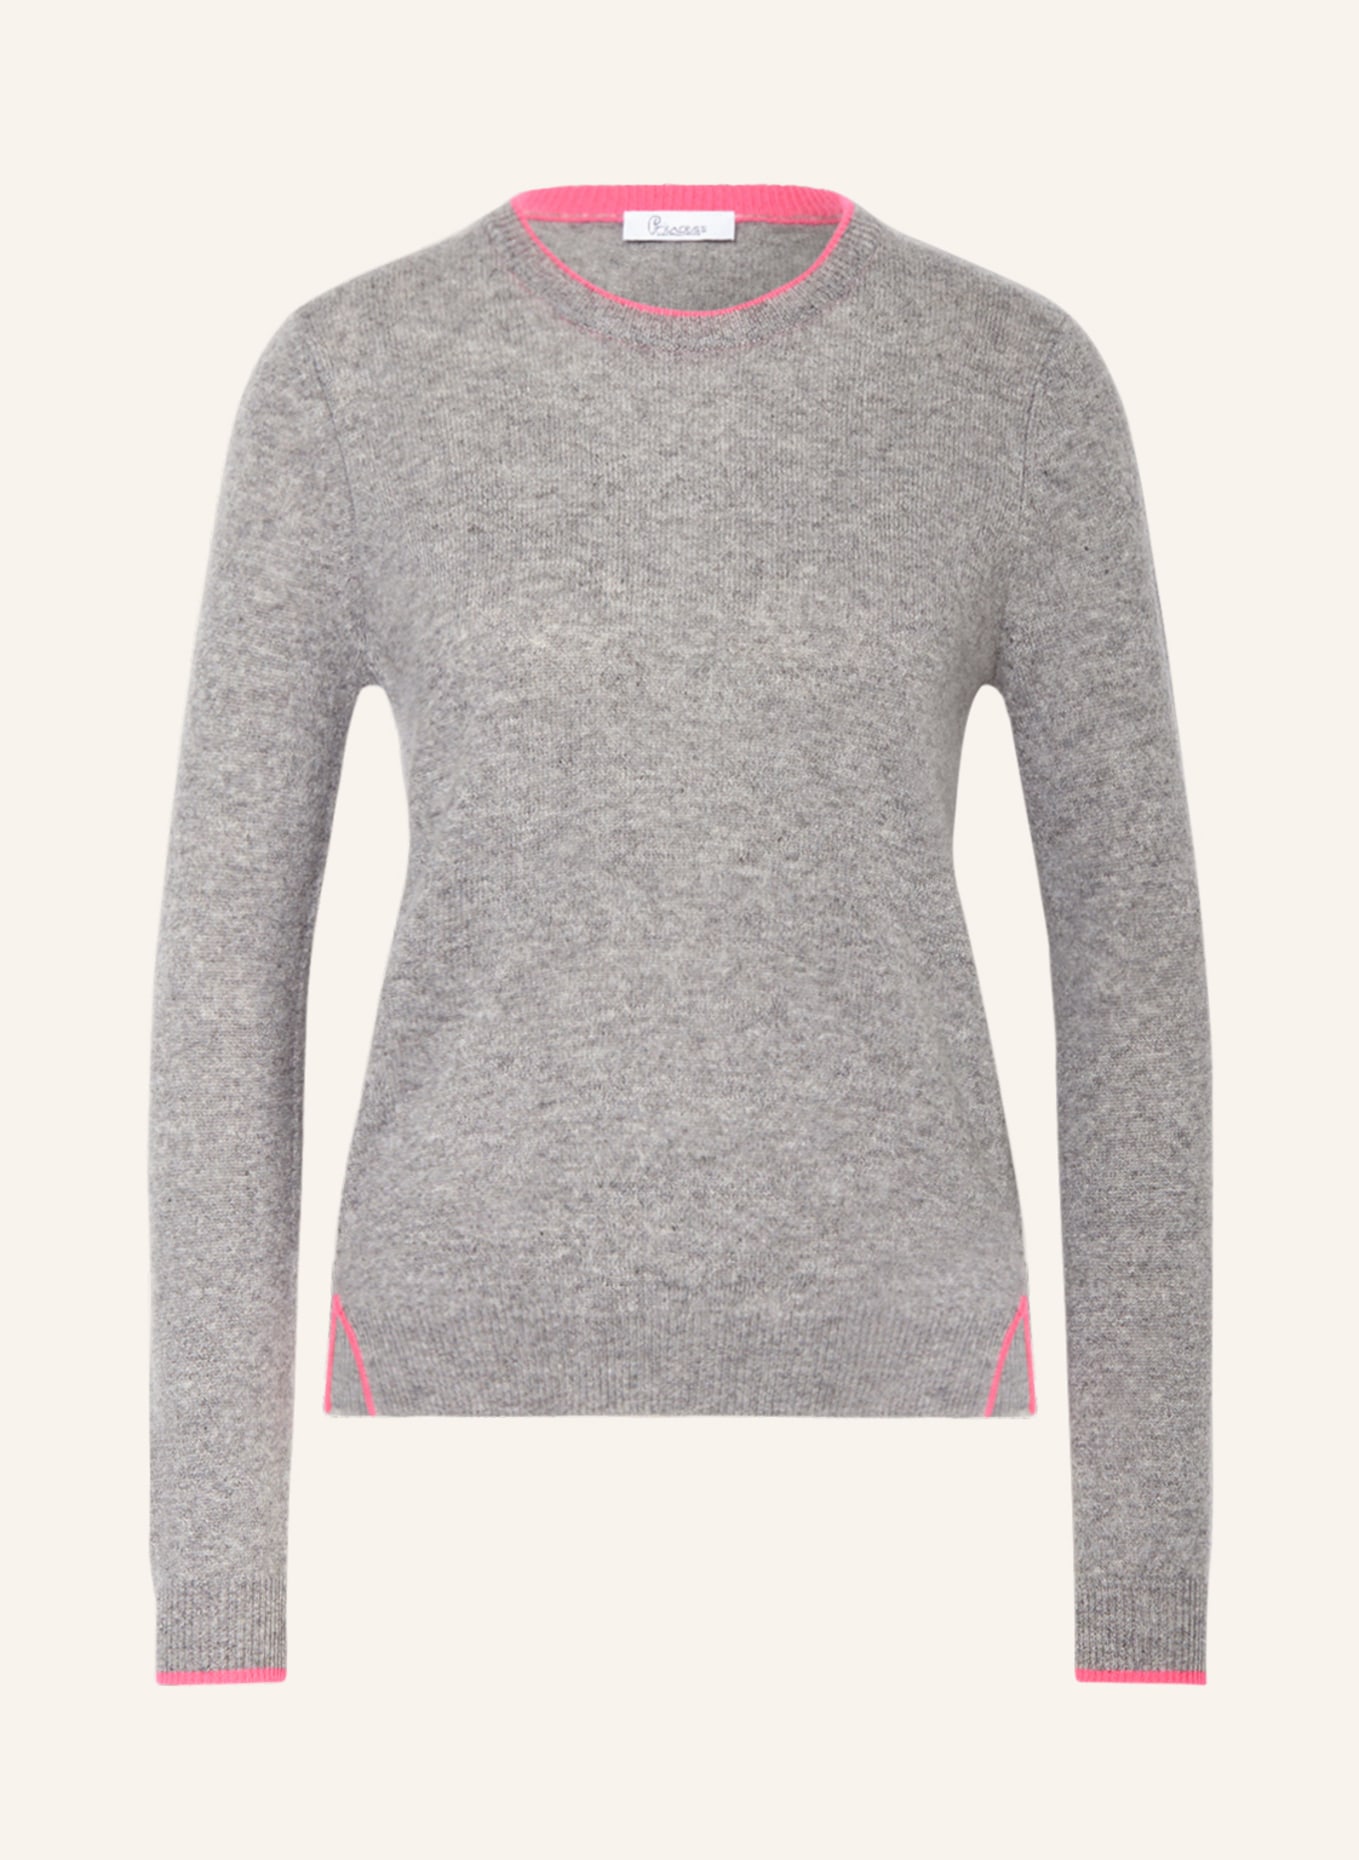 Princess GOES HOLLYWOOD Cashmere sweater, Color: GRAY (Image 1)